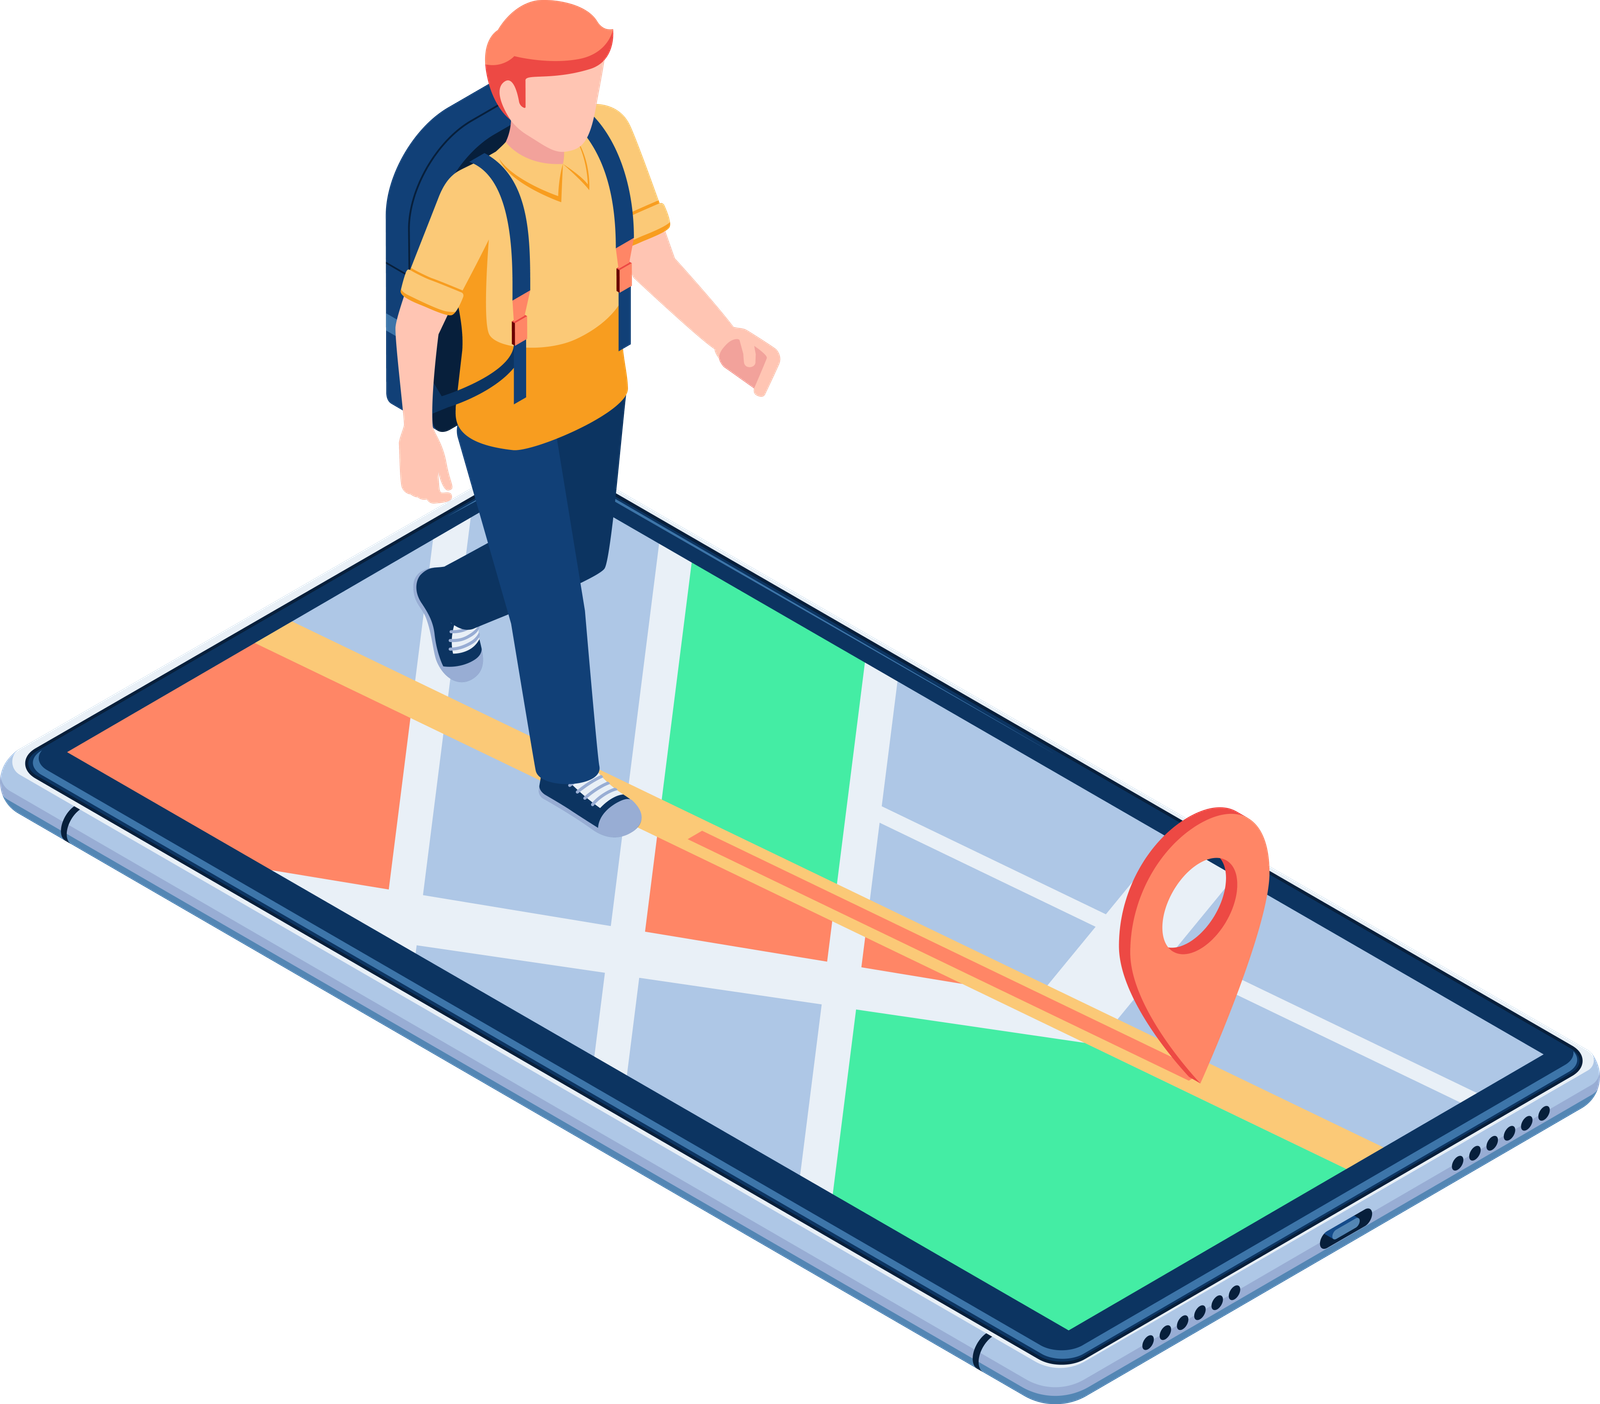 Traveller use map application on a smartphone to reach his destination